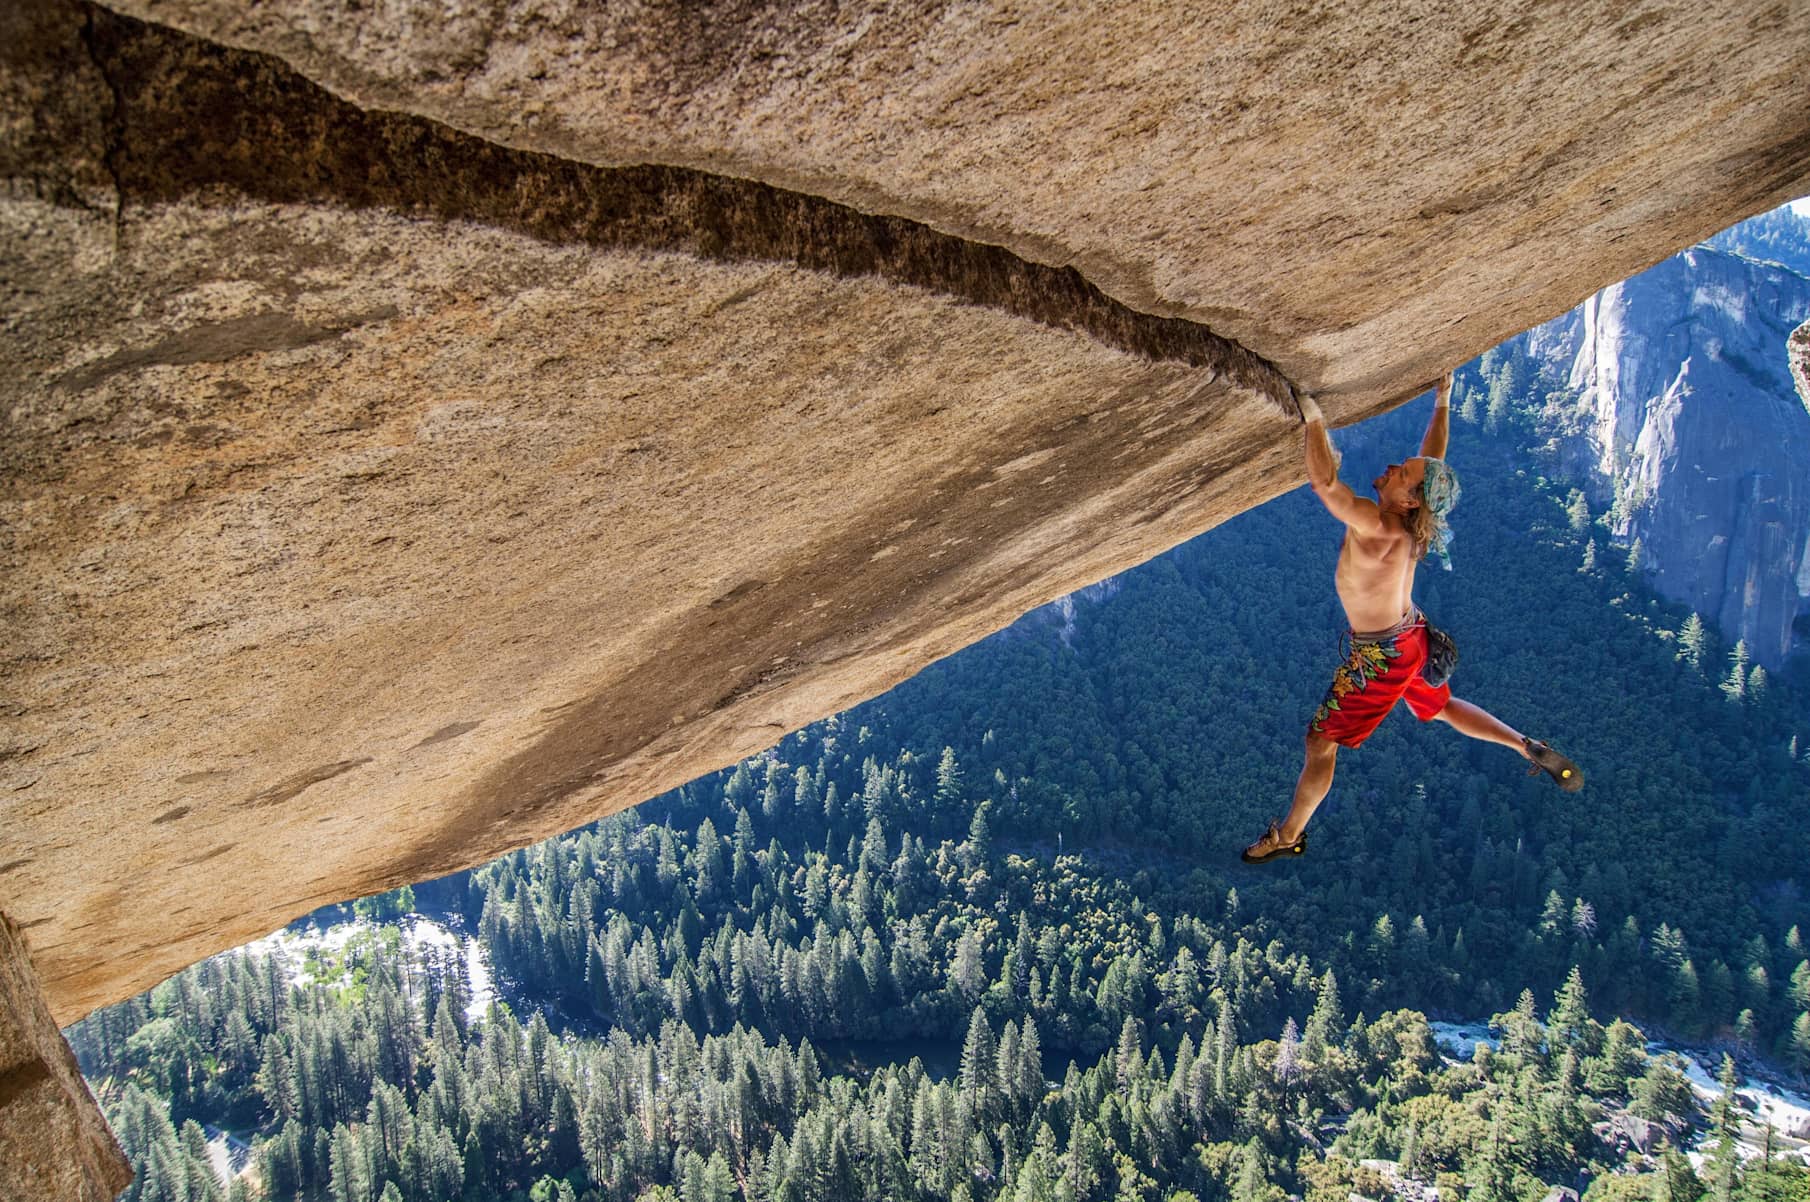 Free-solo Climber Heinz Zak on a difficult overhang in Yosemite National Park, USA